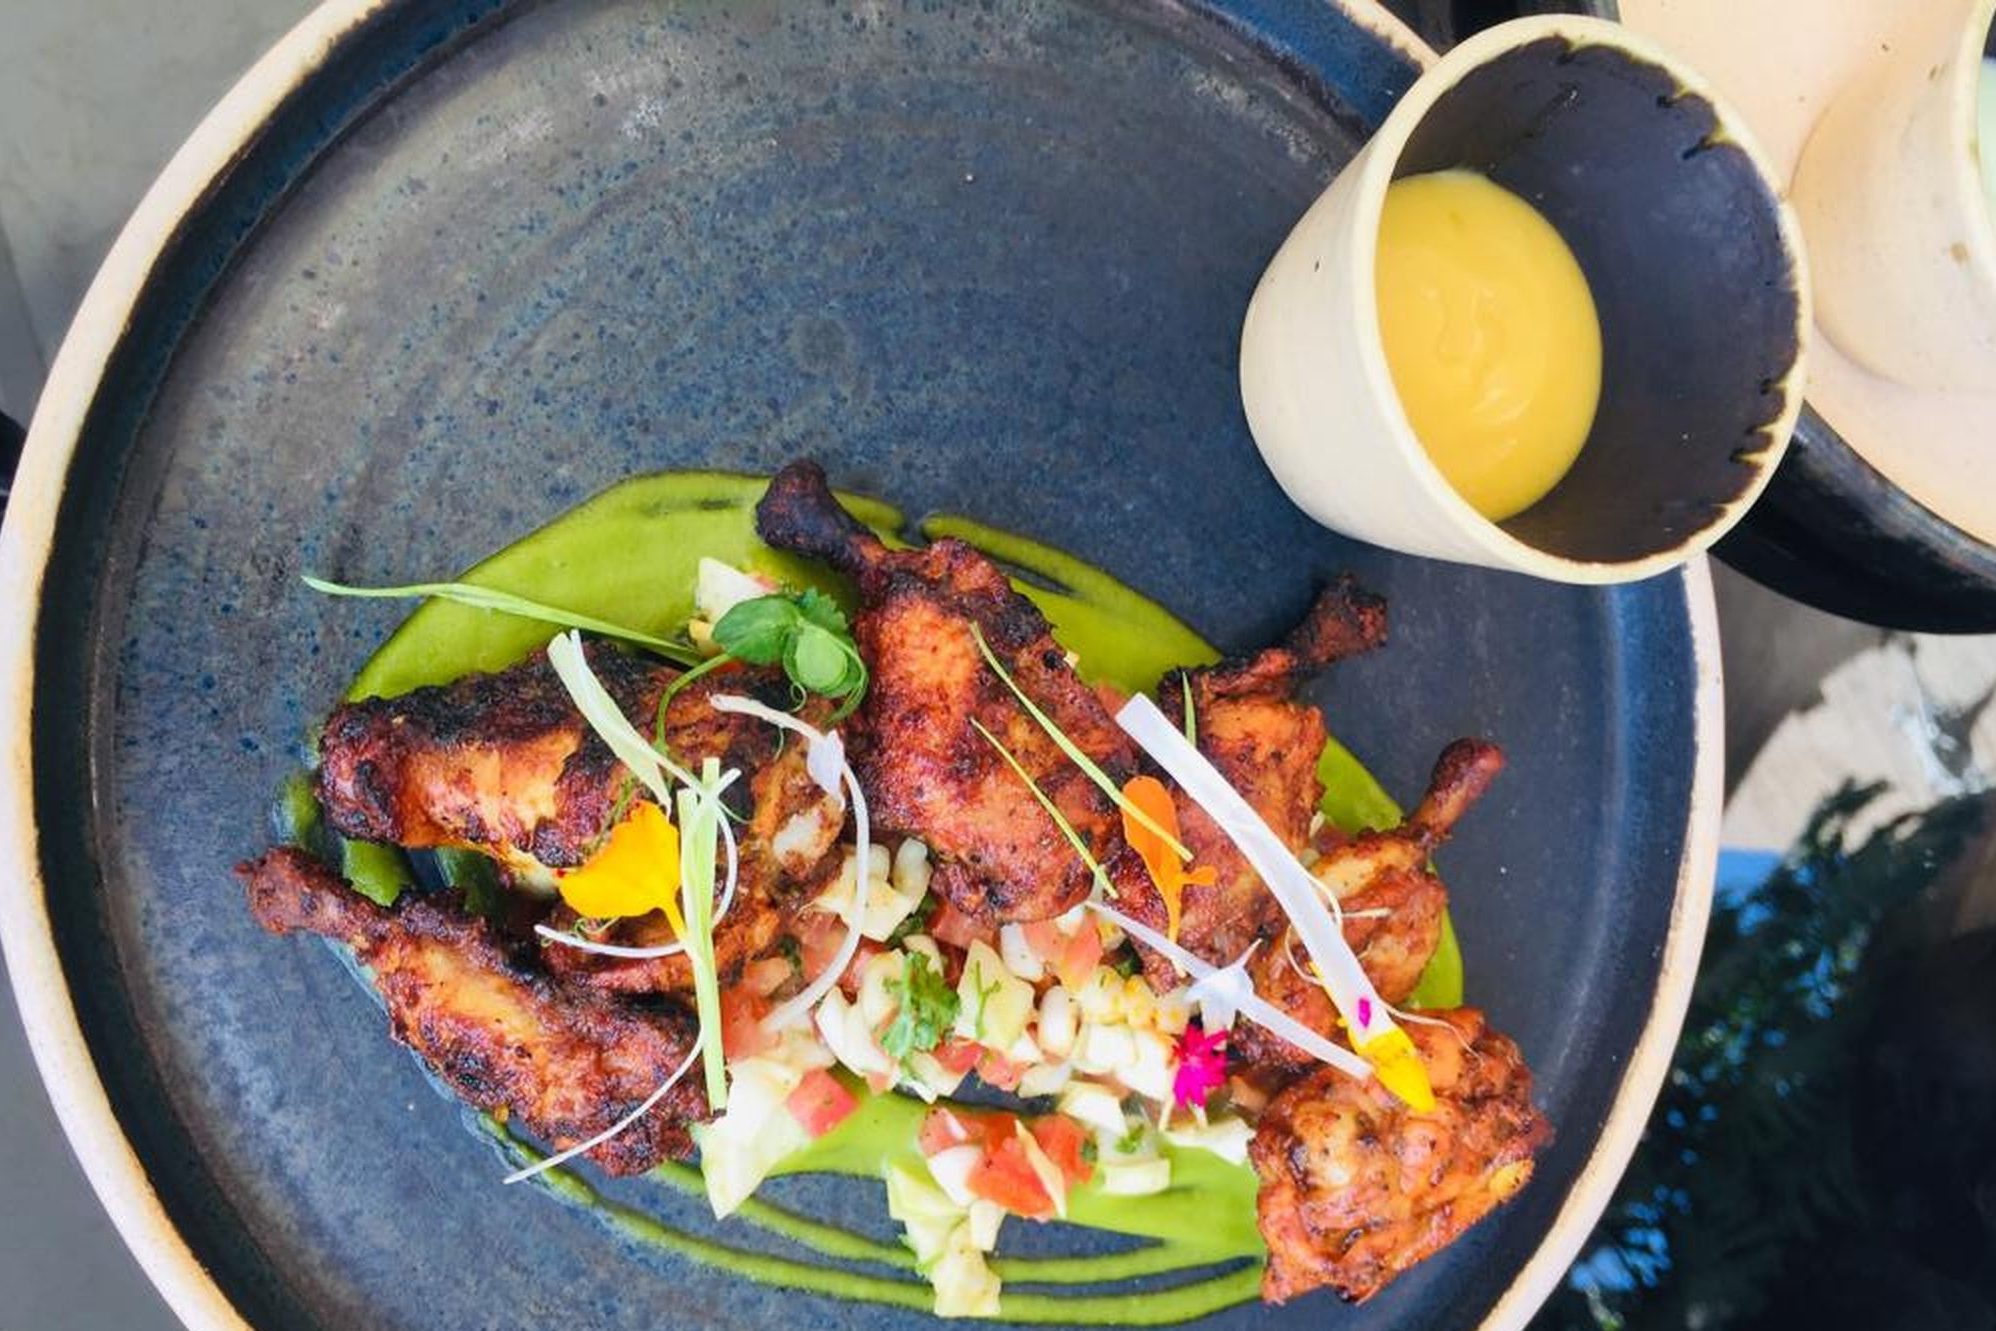 Grilled chicken wings made with mitmita spices, zatar and served with tomato, mango dip and kachumbari salad at the Tribe Hotel. Kachumbari is a common dish in Kenya